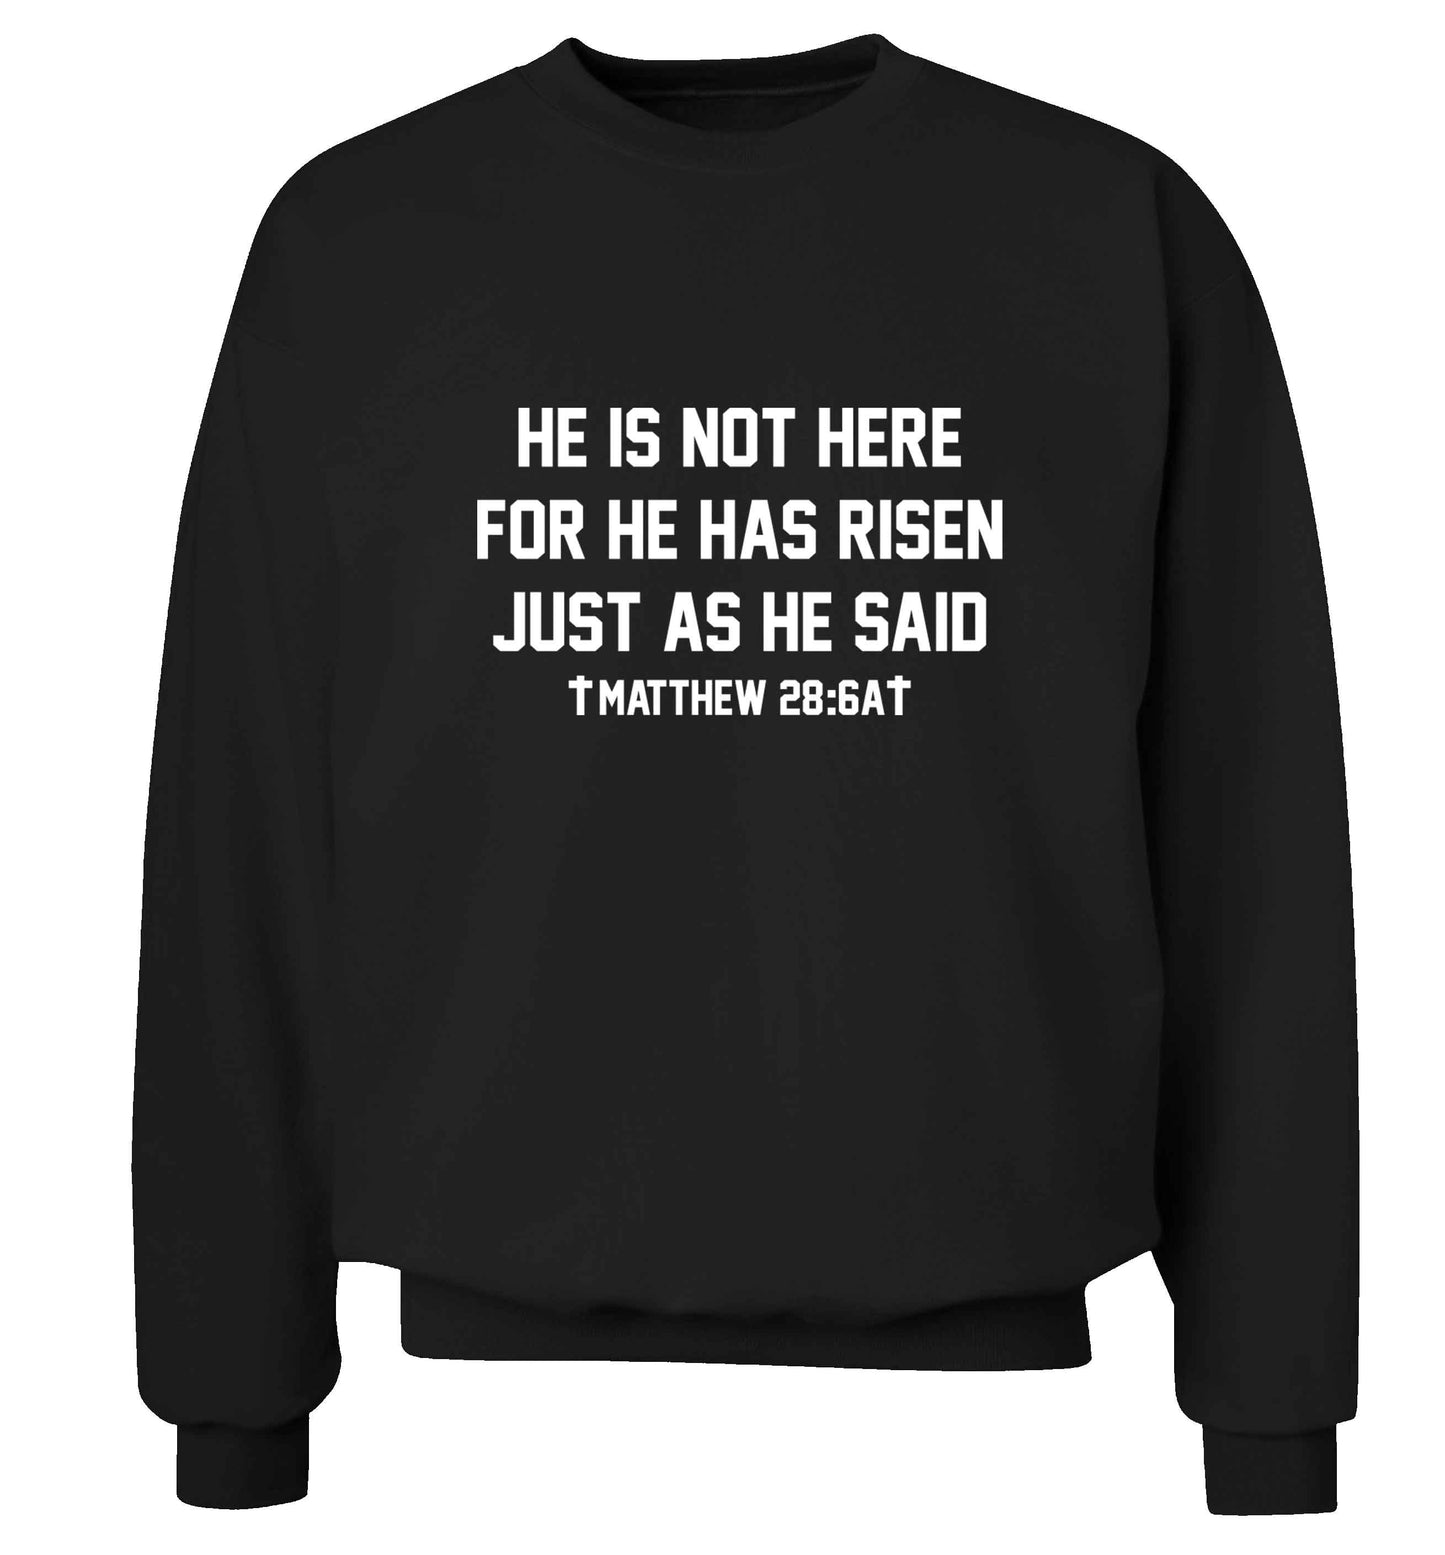 He is not here for he has risen just as he said matthew 28:6A adult's unisex black sweater 2XL